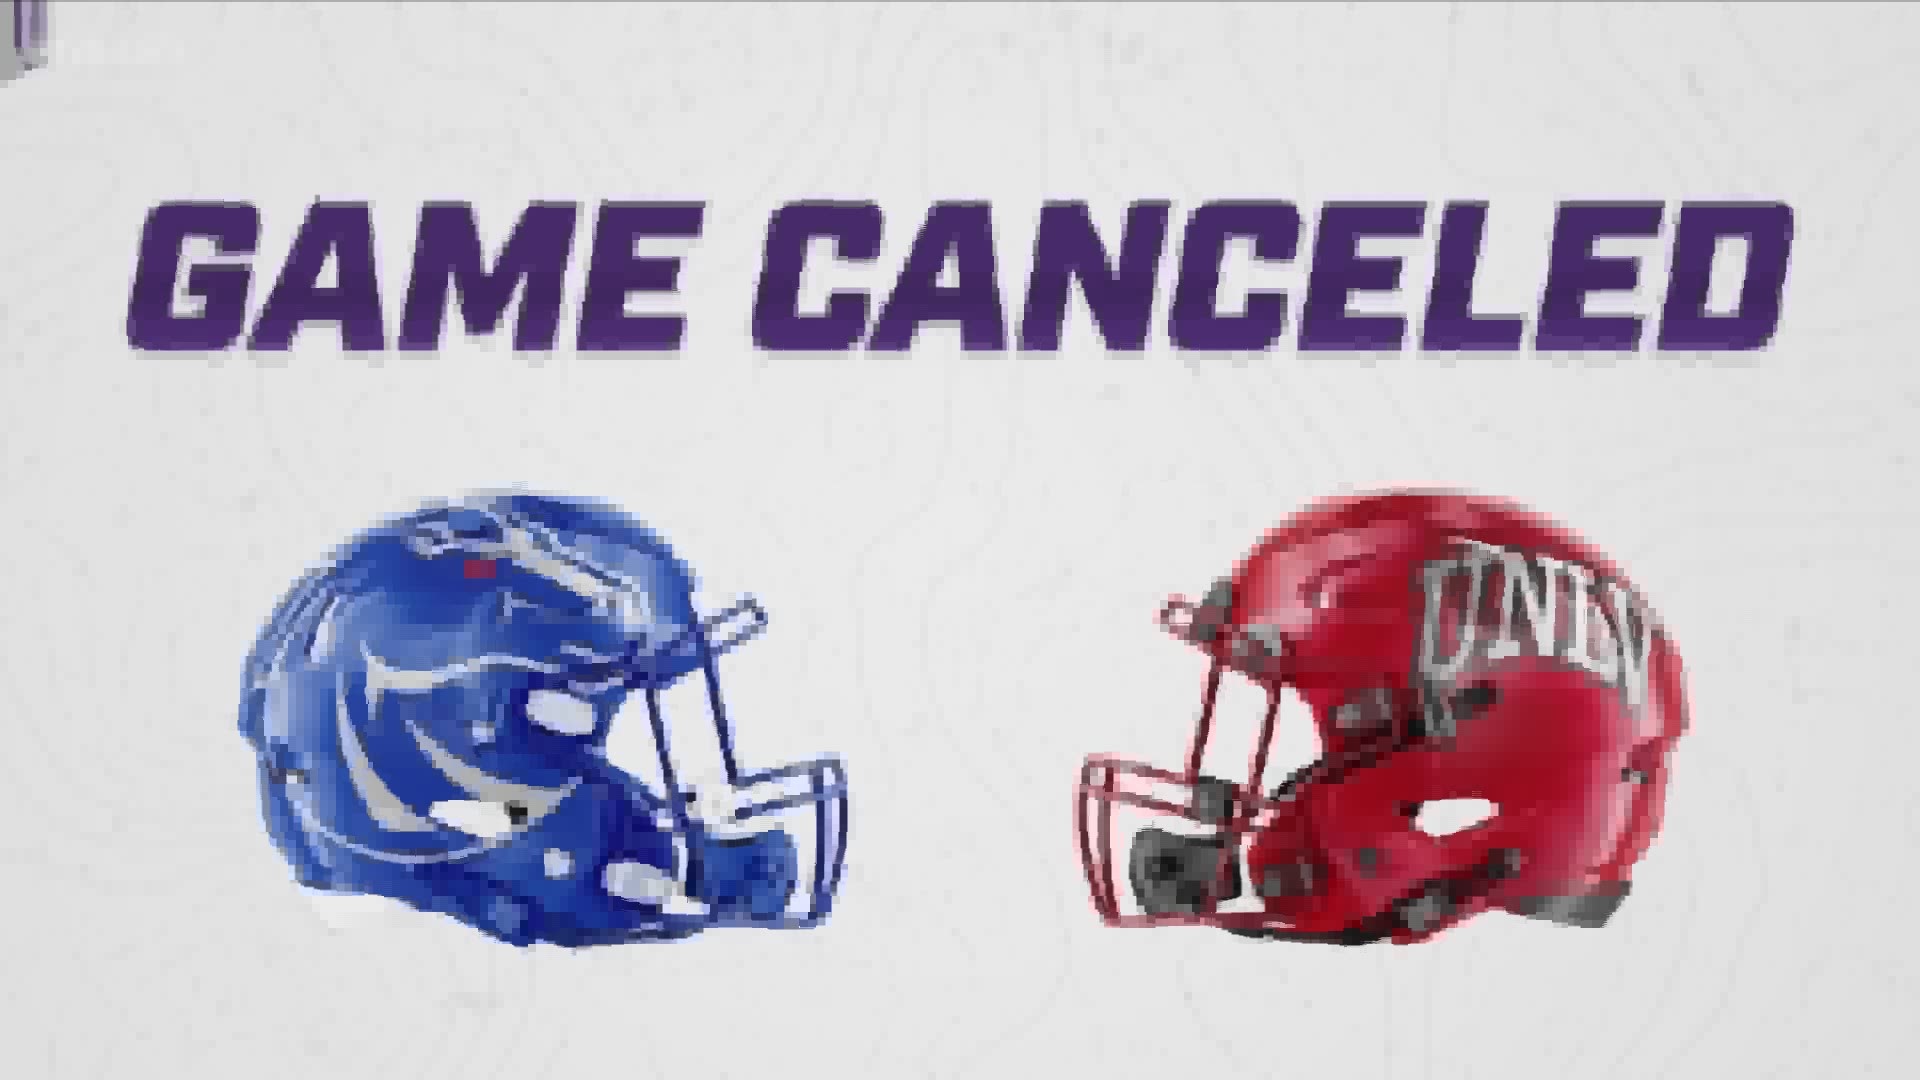 The Mountain West Conference released a joint statement Wednesday night announcing the cancelation of Friday's game.